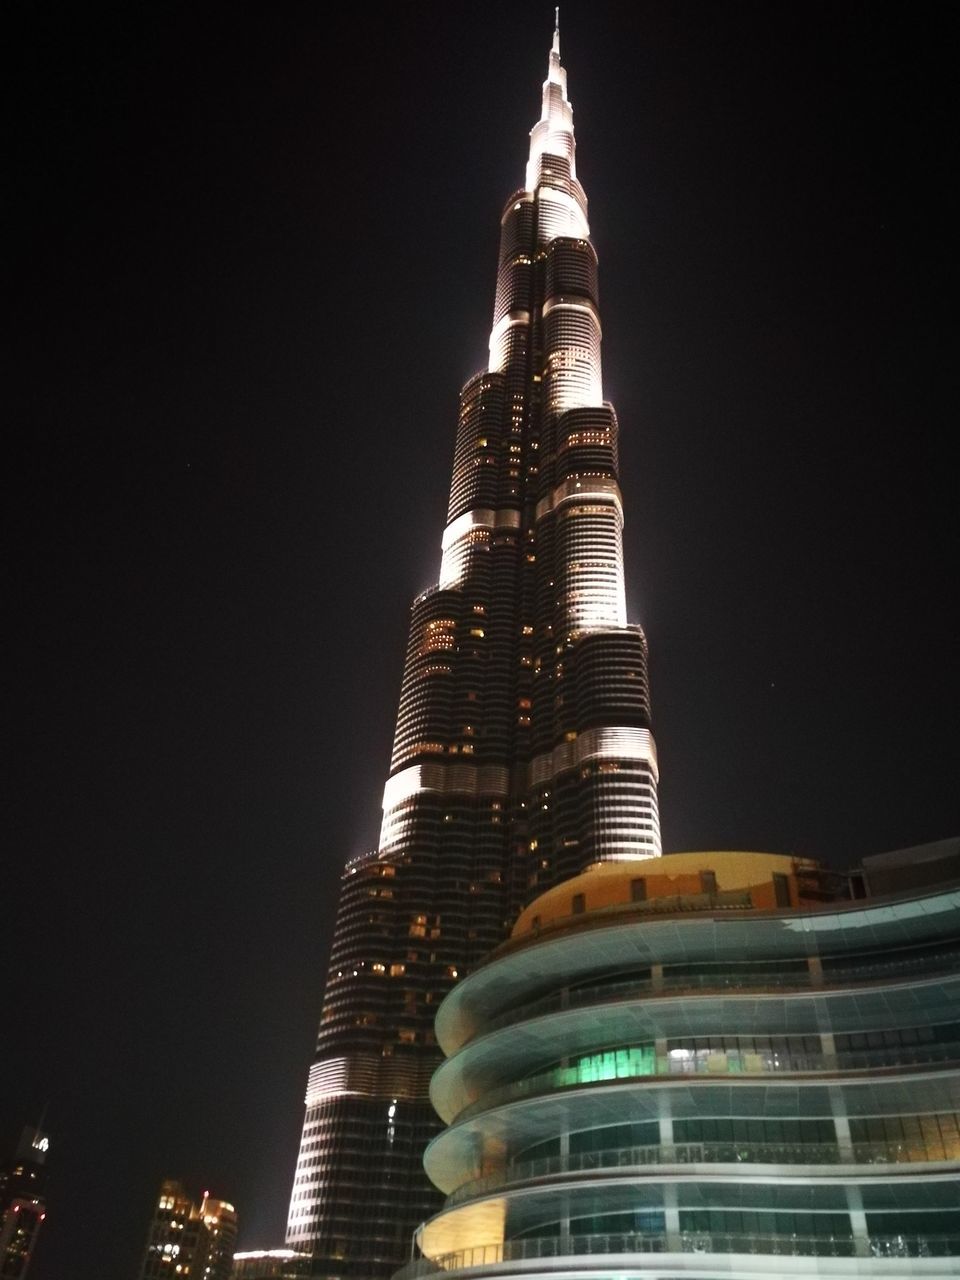 architecture, building exterior, tall - high, built structure, night, modern, travel destinations, low angle view, illuminated, tourism, skyscraper, city, no people, sky, outdoors